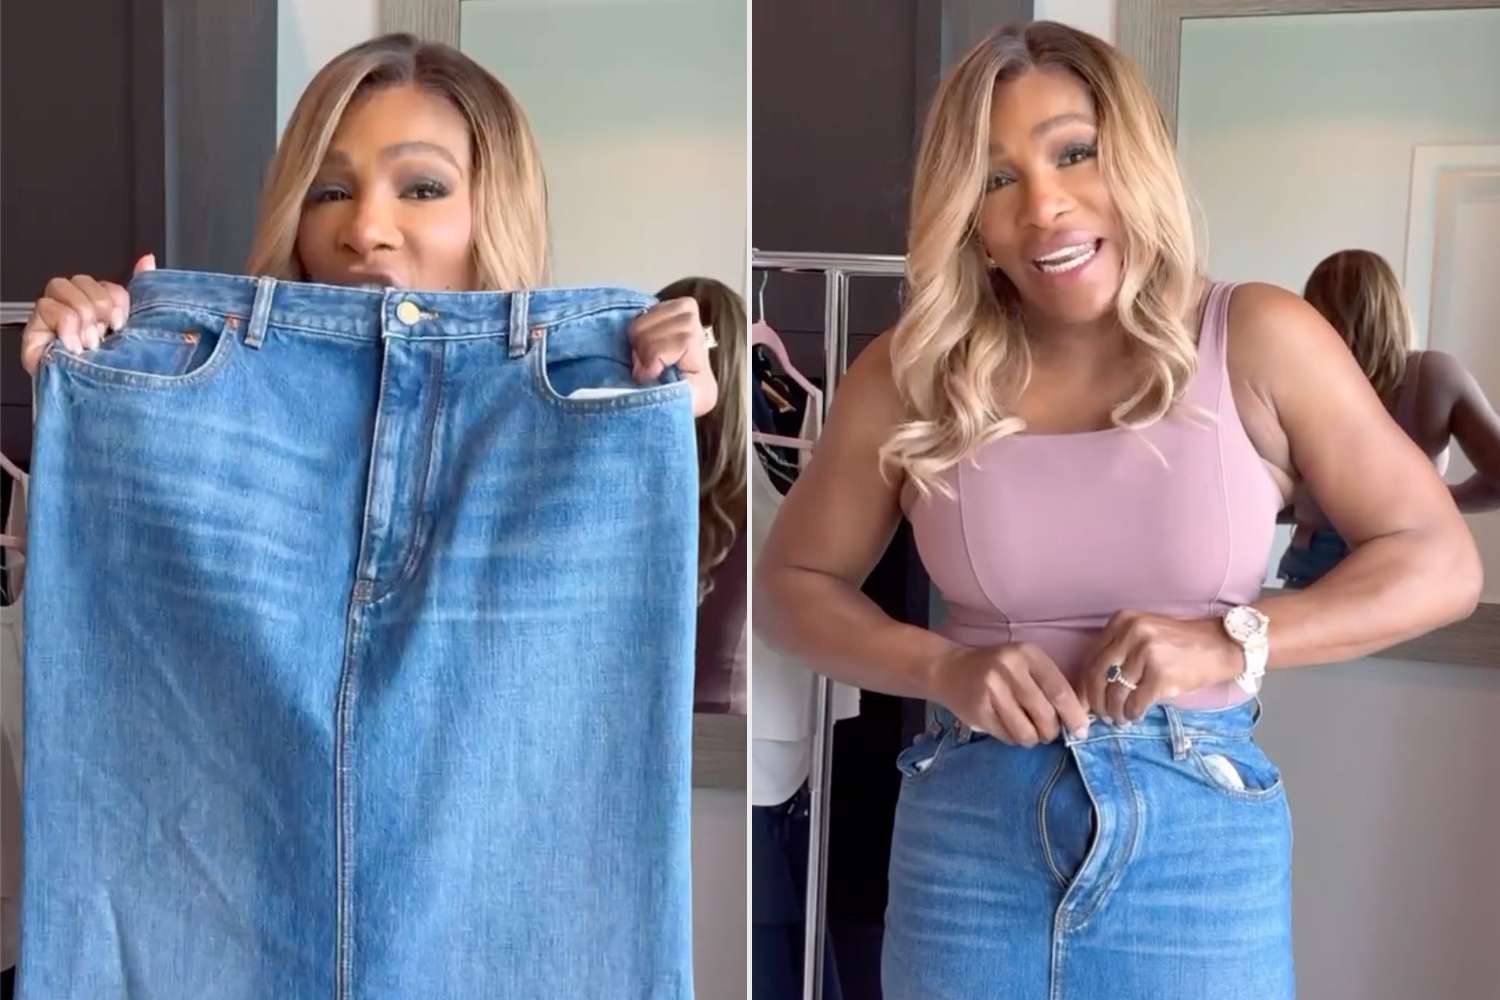 Serena Williams Tries on Valentino Denim Skirt for 3rd Time Amid Weight Loss Journey [Video]